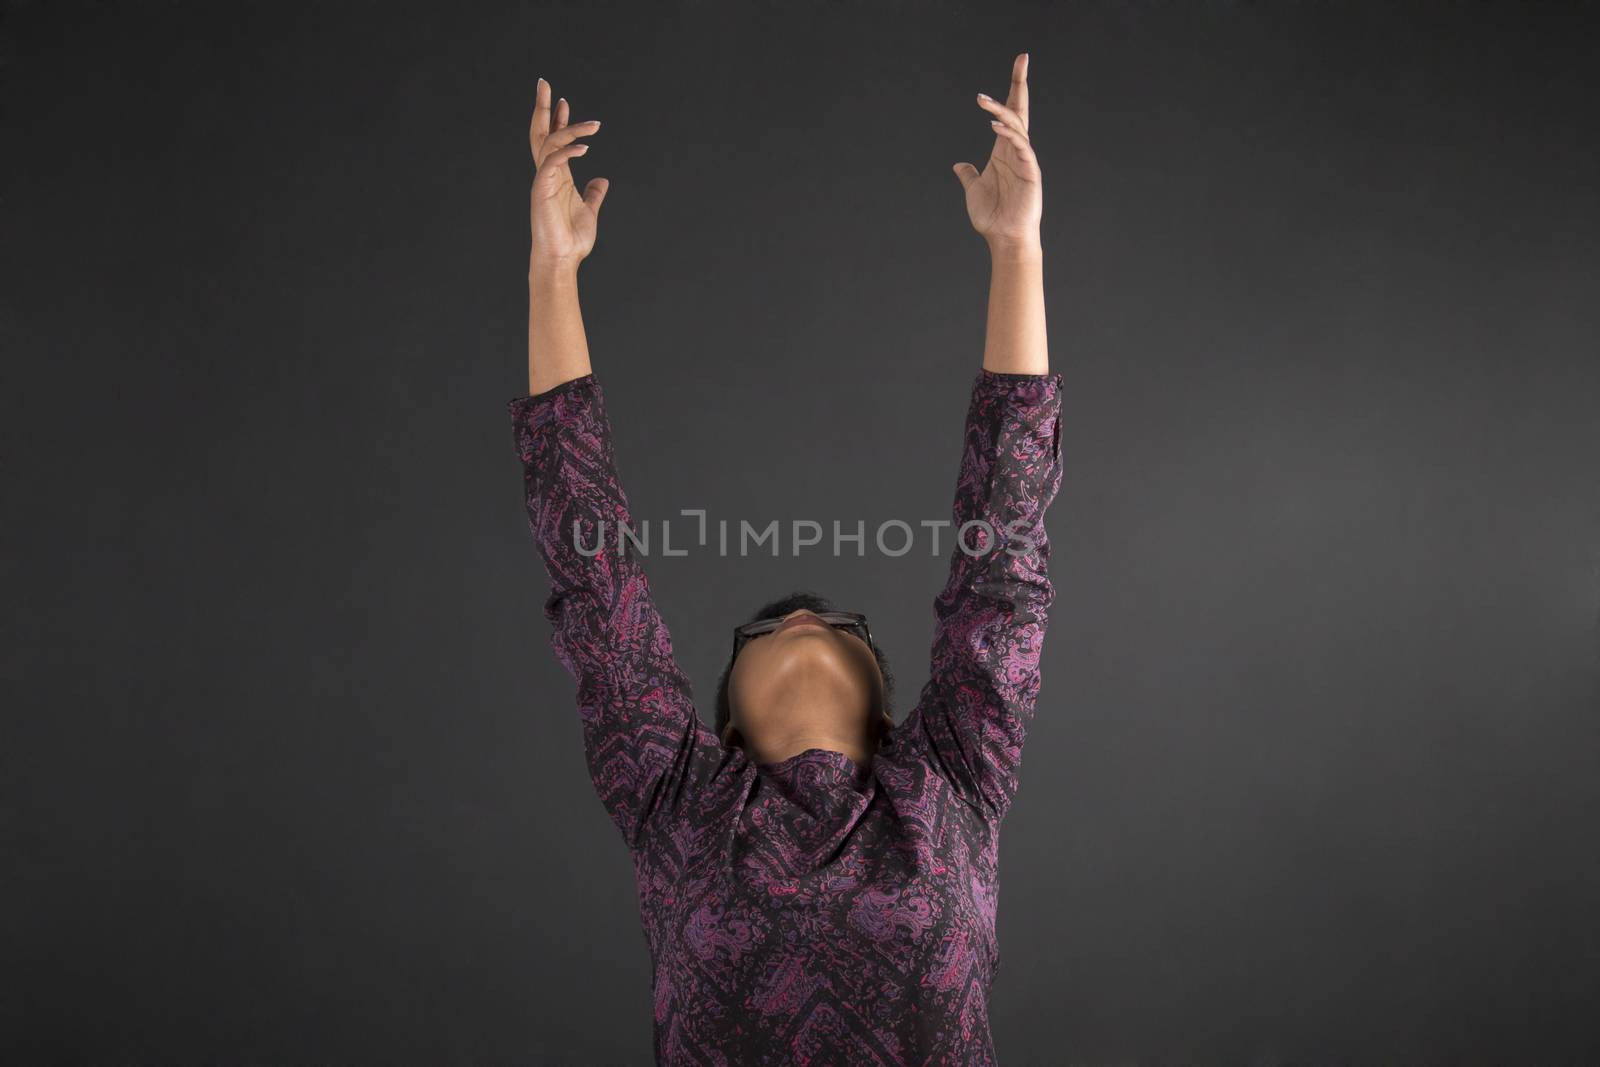 South African or African American woman teacher or student reaching for the sky on blackboard background